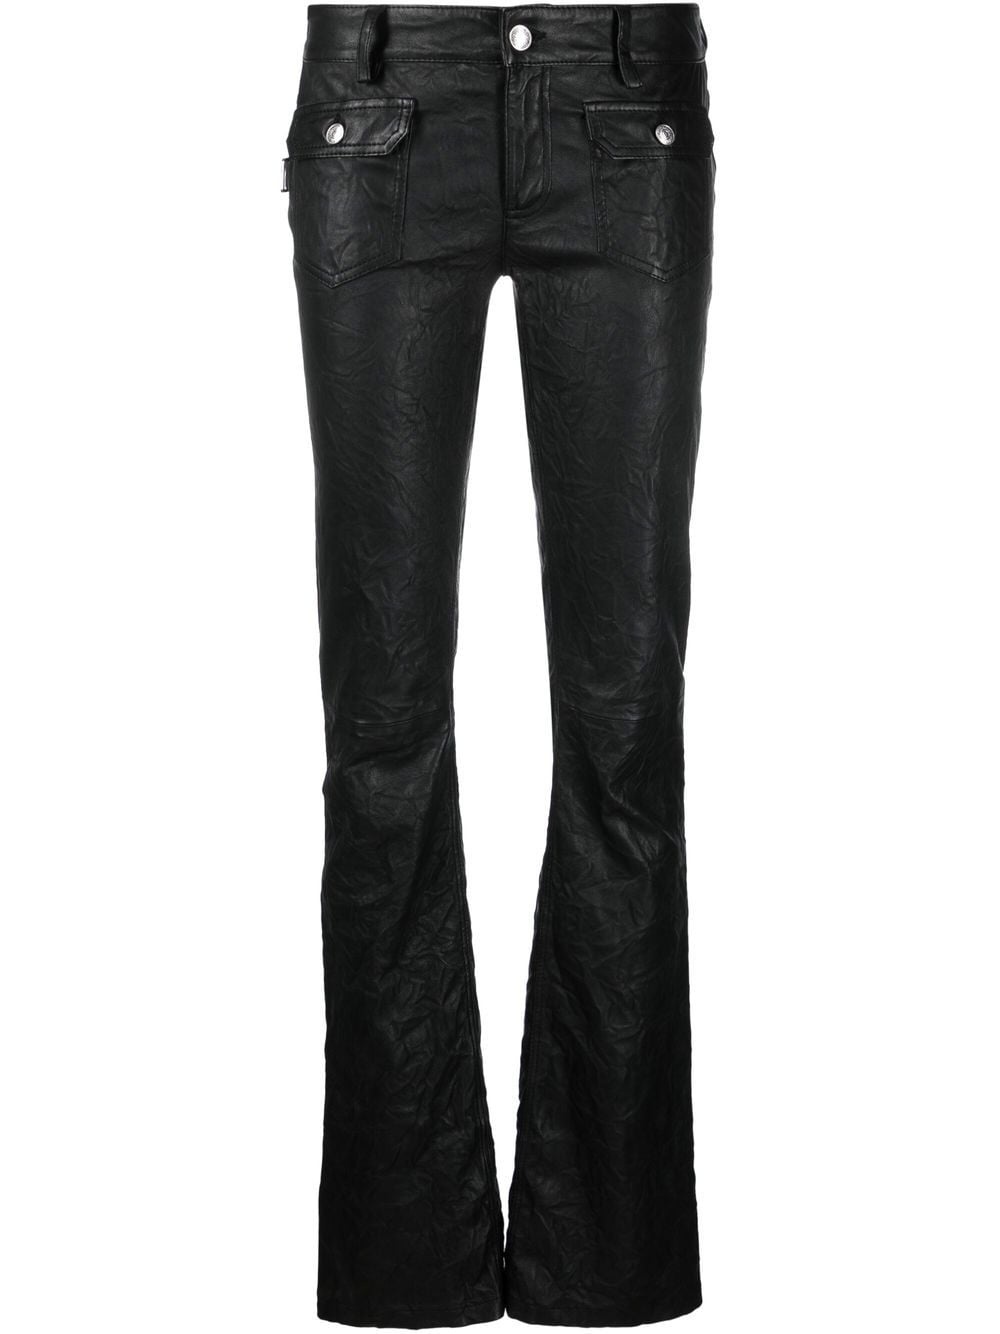 kick-flare leather jeans - 1